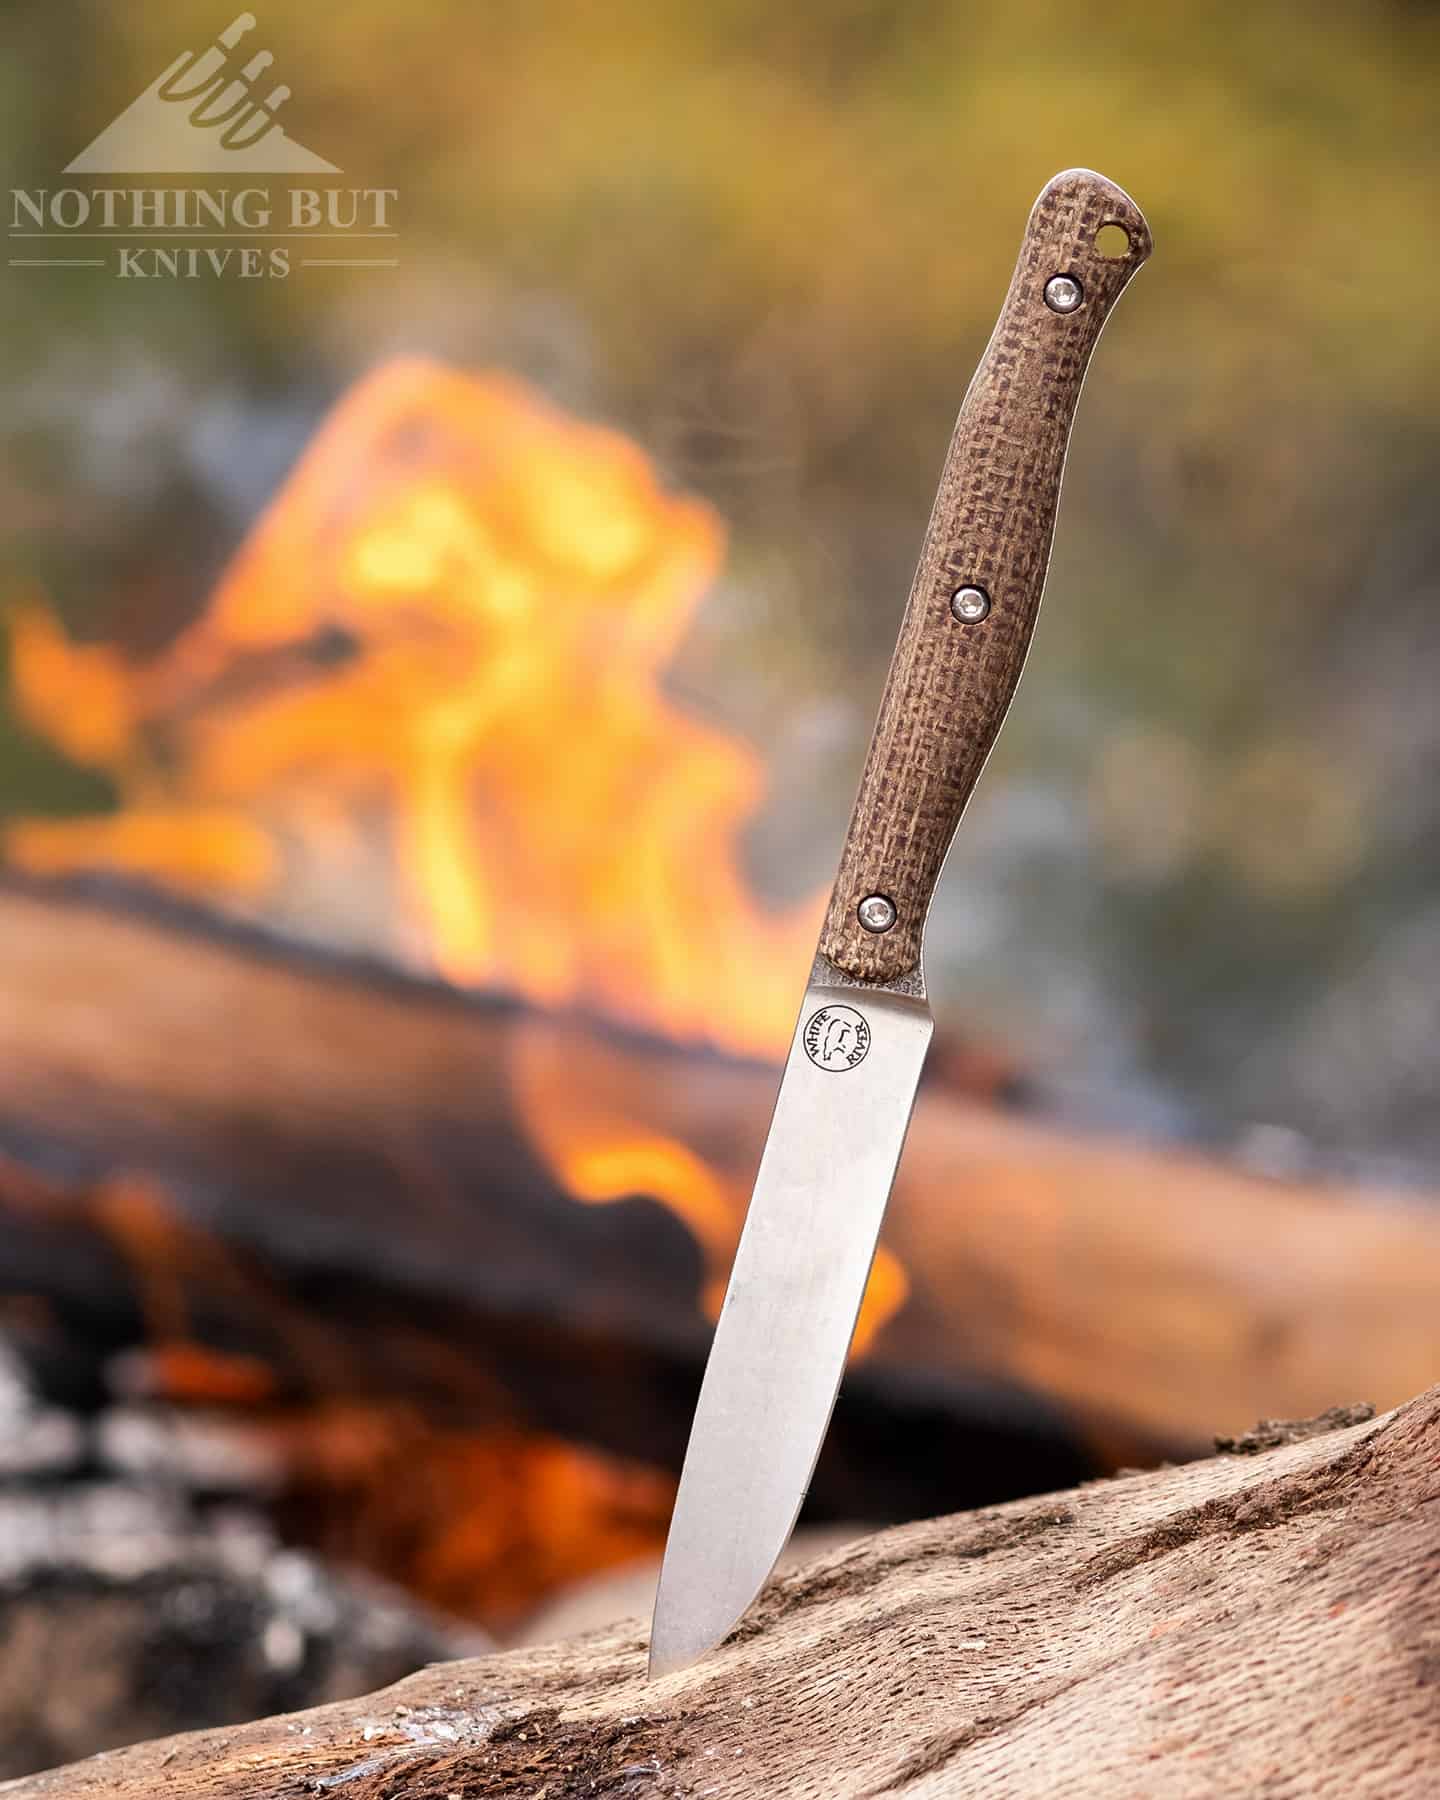 https://www.nothingbutknives.com/wp-content/uploads/2022/11/Camping-With-The-White-RIver-Knives-Exodus-4.jpg